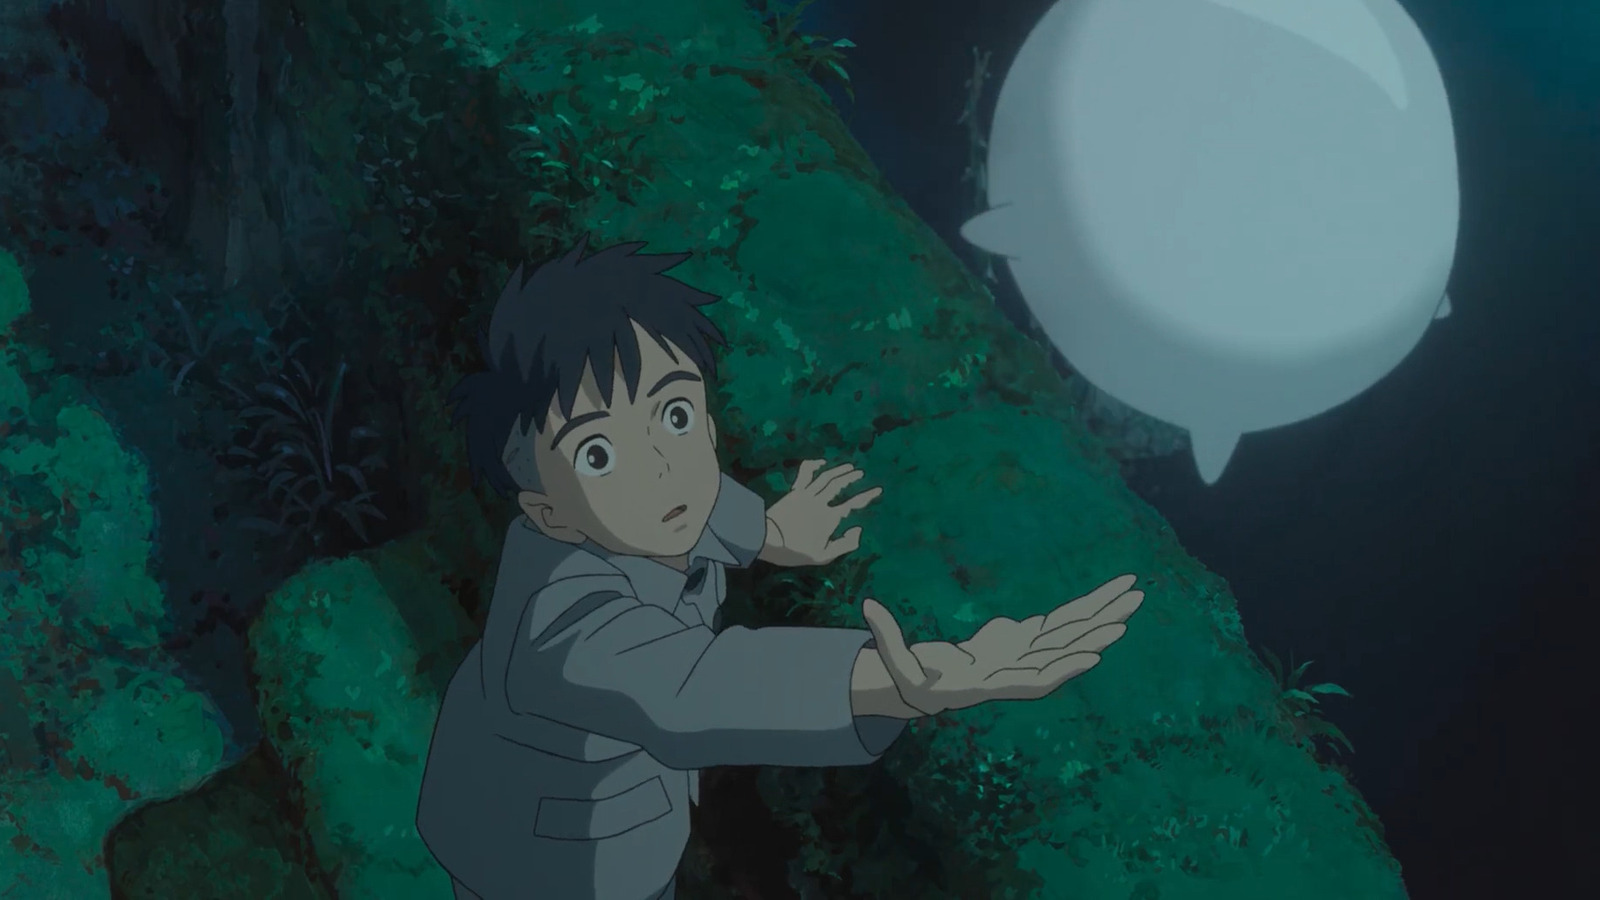 The Boy And The Heron Won't Be Hayao Miyazaki's Final Film After All